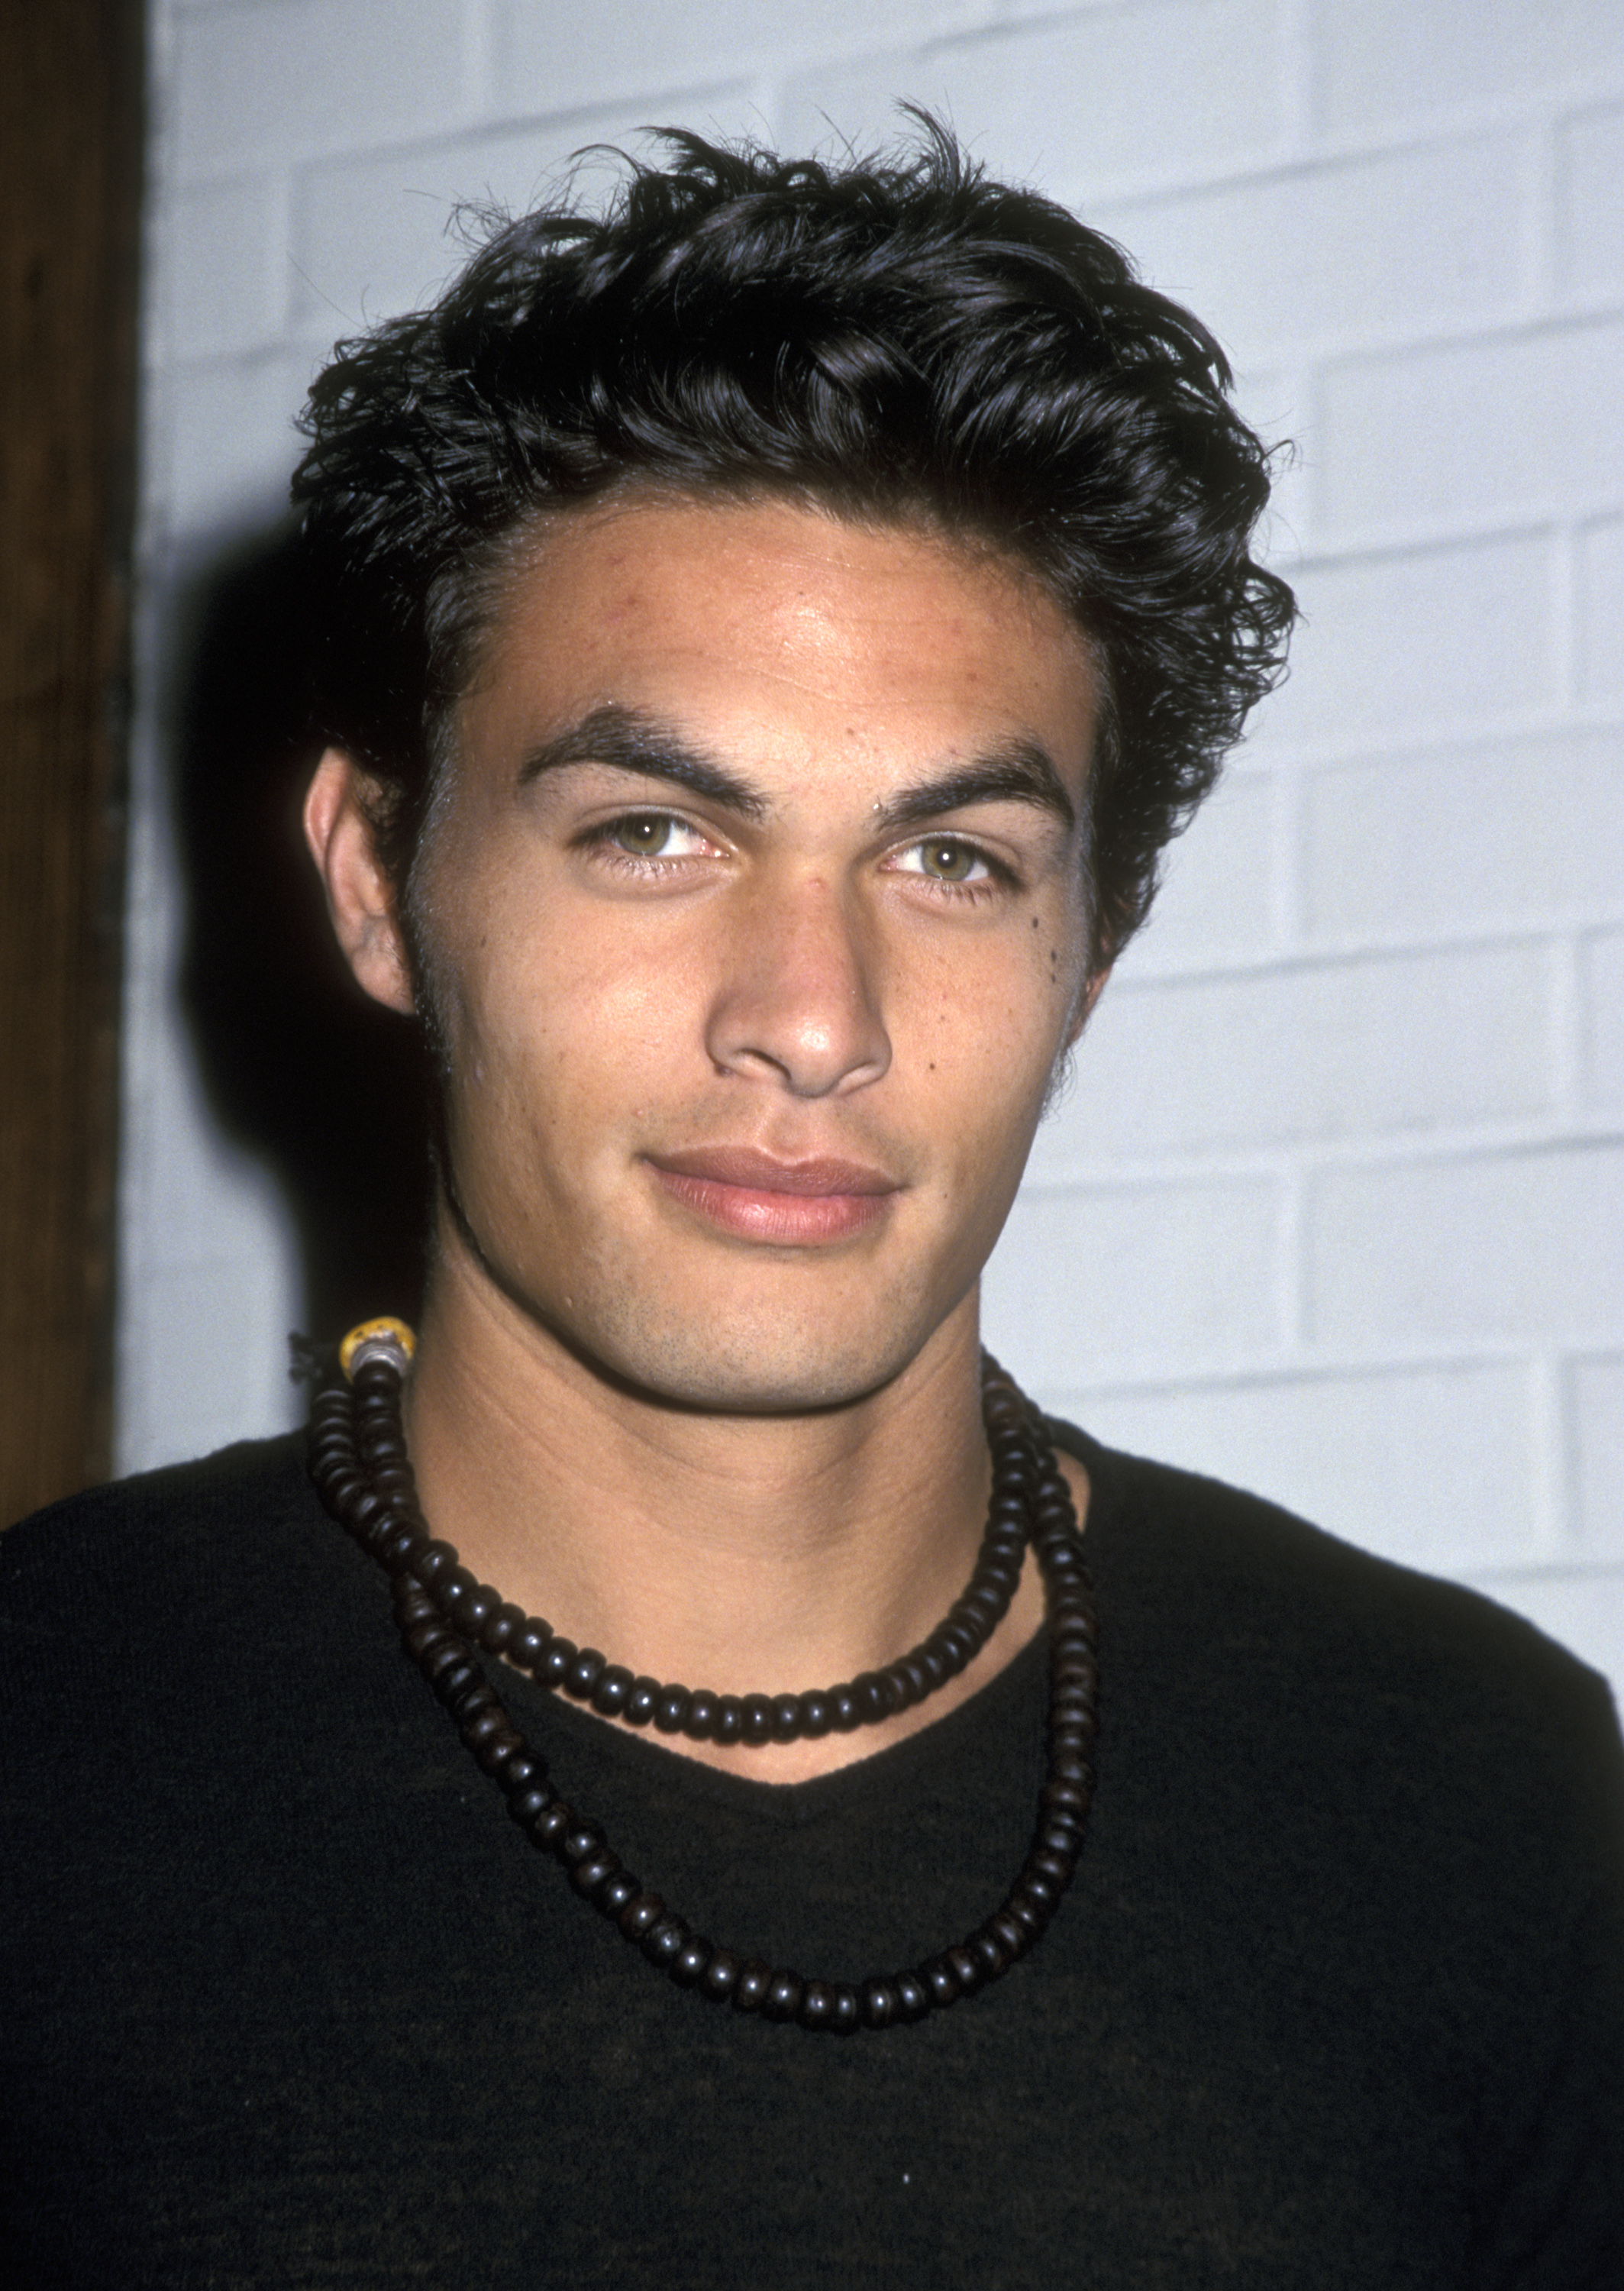 Jason Momoa attends a party in honor of Henry Diltz on November 30, 2000 in Los Angeles, California | Source: Getty Images